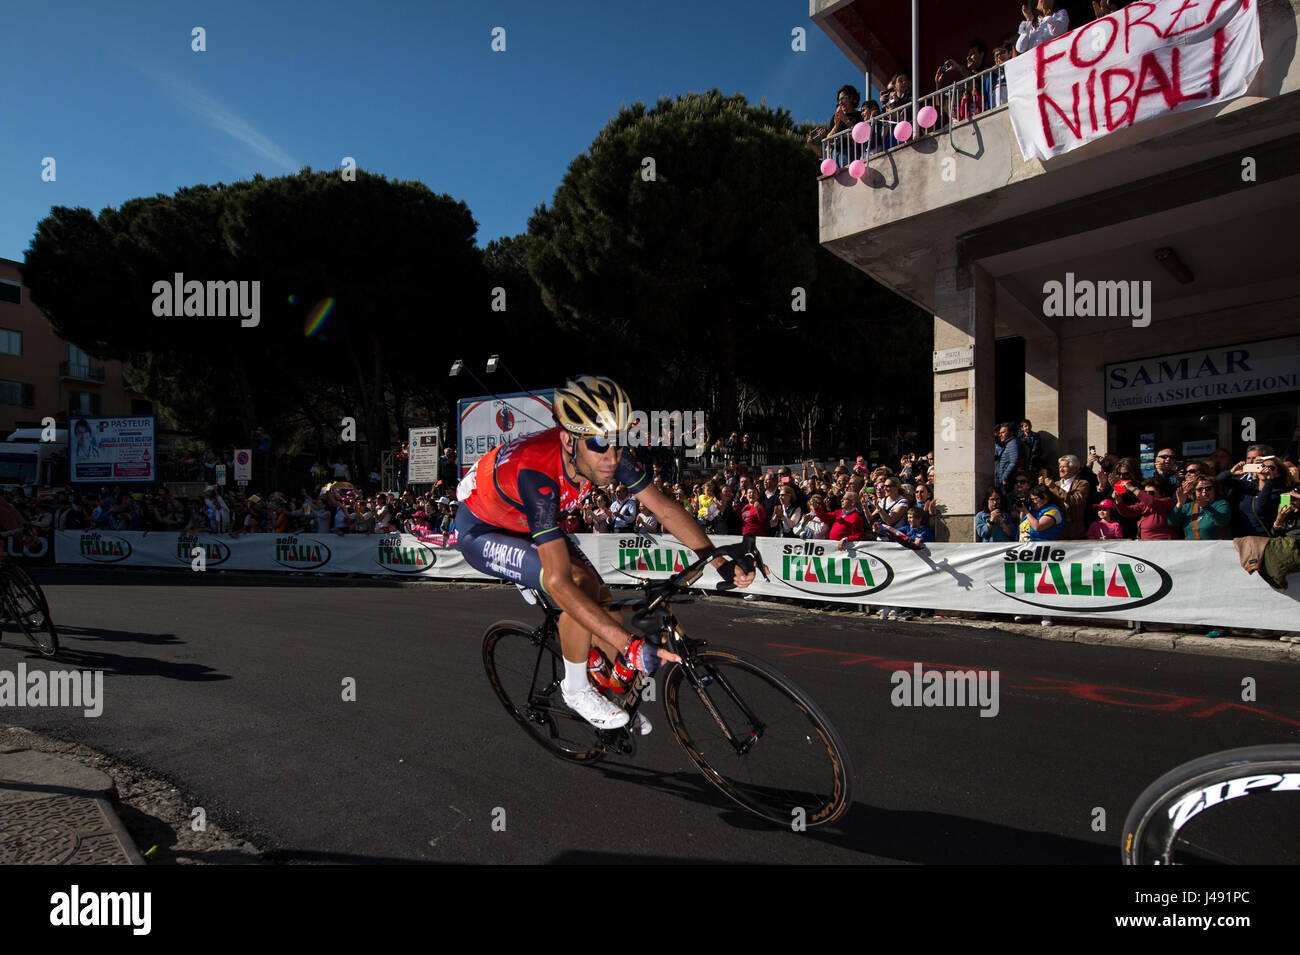 Messina, Italy. 10th May, 2017. Vincenzo Nibali during of stage 5 of the Giro d'Italia in Messina, Italy. Credit: Simon Gill/Alamy Live News Stock Photo